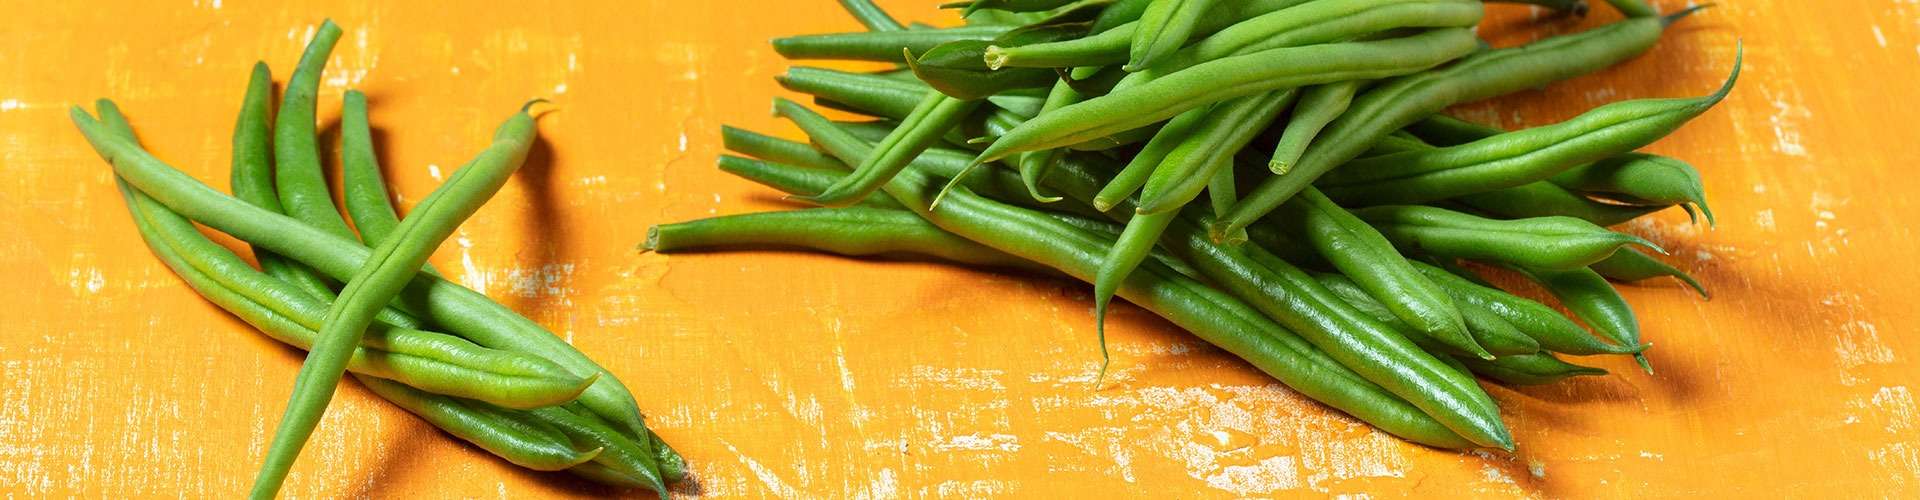 Discovered haricots verts